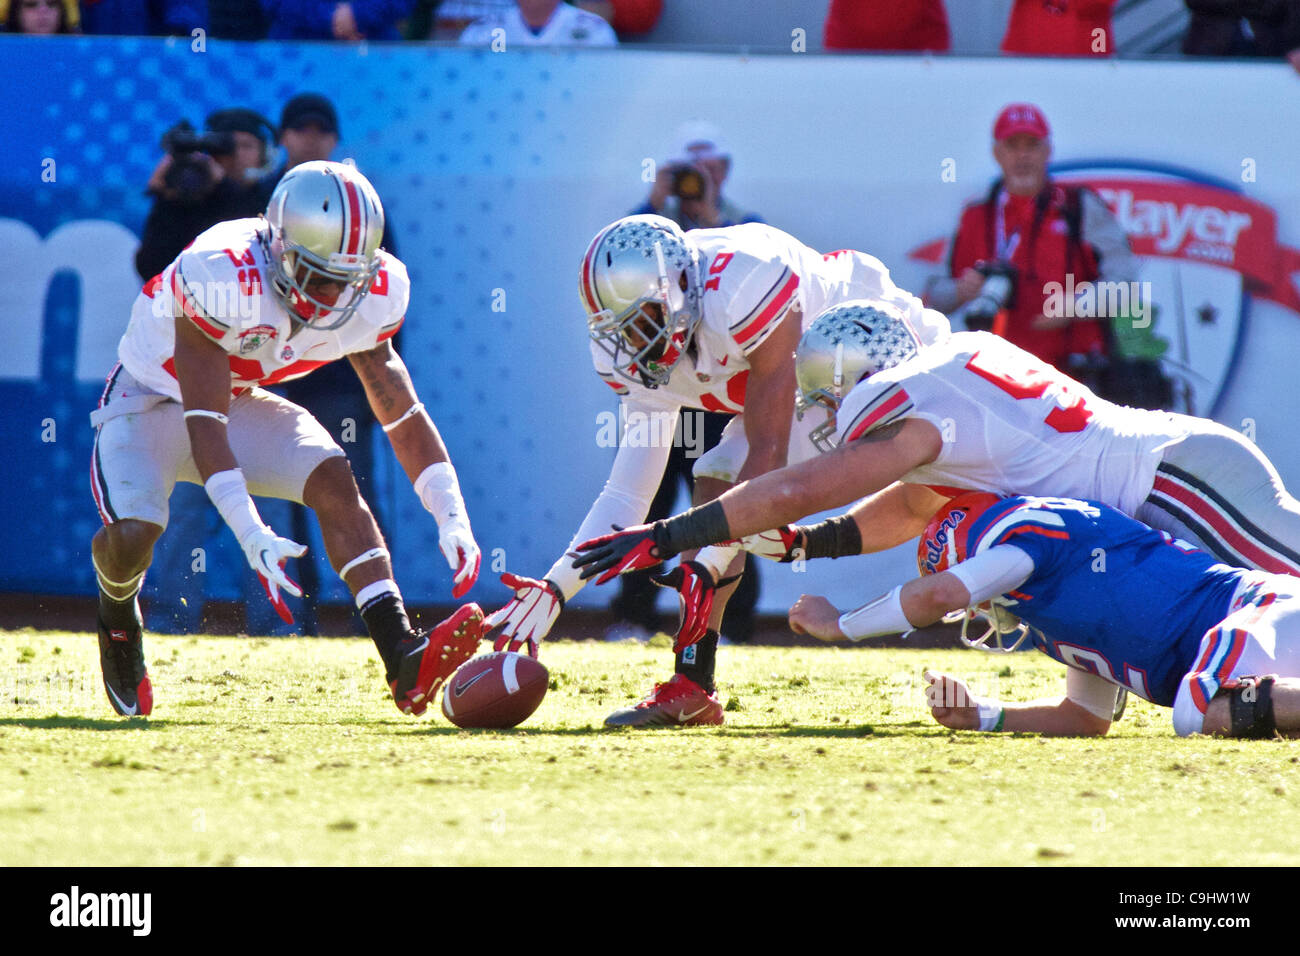 Jan. 2, 2012 - Jacksonville, Florida, U.S - Ohio State Buckeyes defensive back Bradley Roby (25), Buckeyes linebacker Ryan Shazier (10) and Buckeyes defensive tackle John Simon (54) go for the loose ball during the first quarter of the game between Ohio State and Florida in the Gator Bowl at Everban Stock Photo